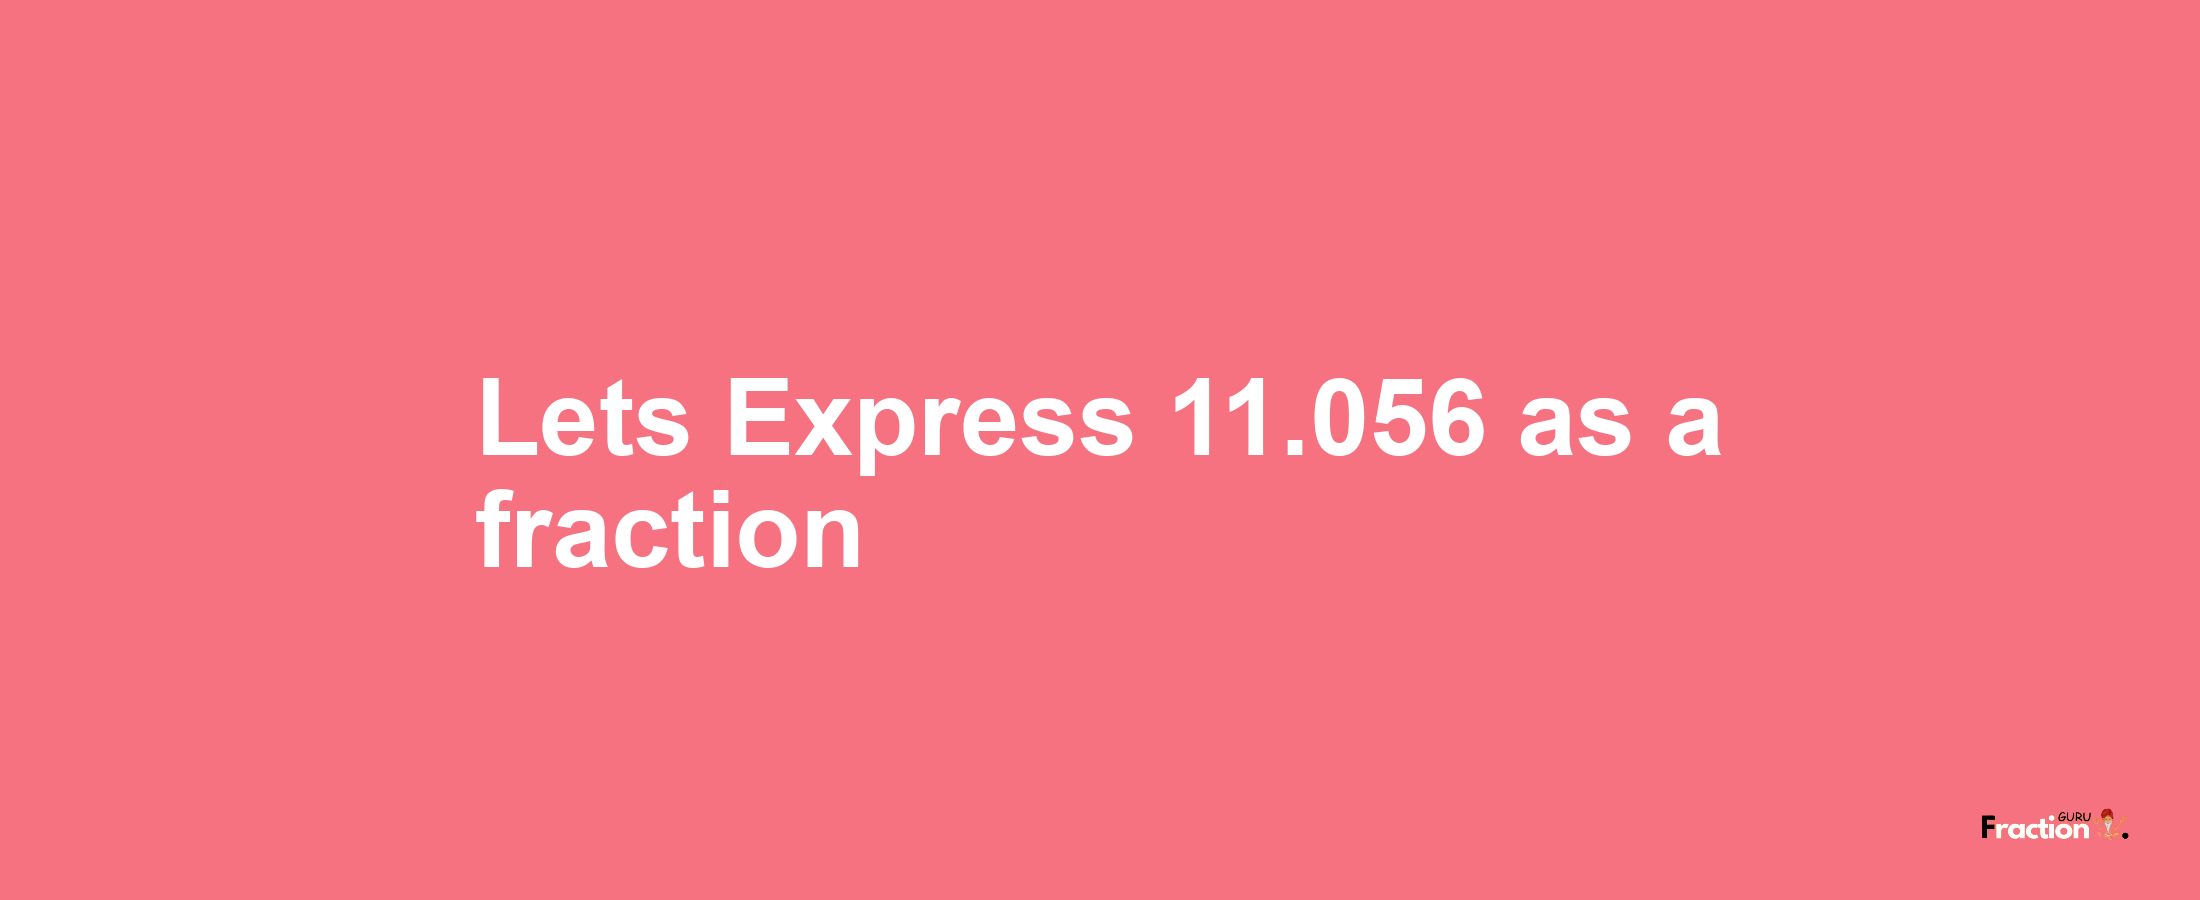 Lets Express 11.056 as afraction